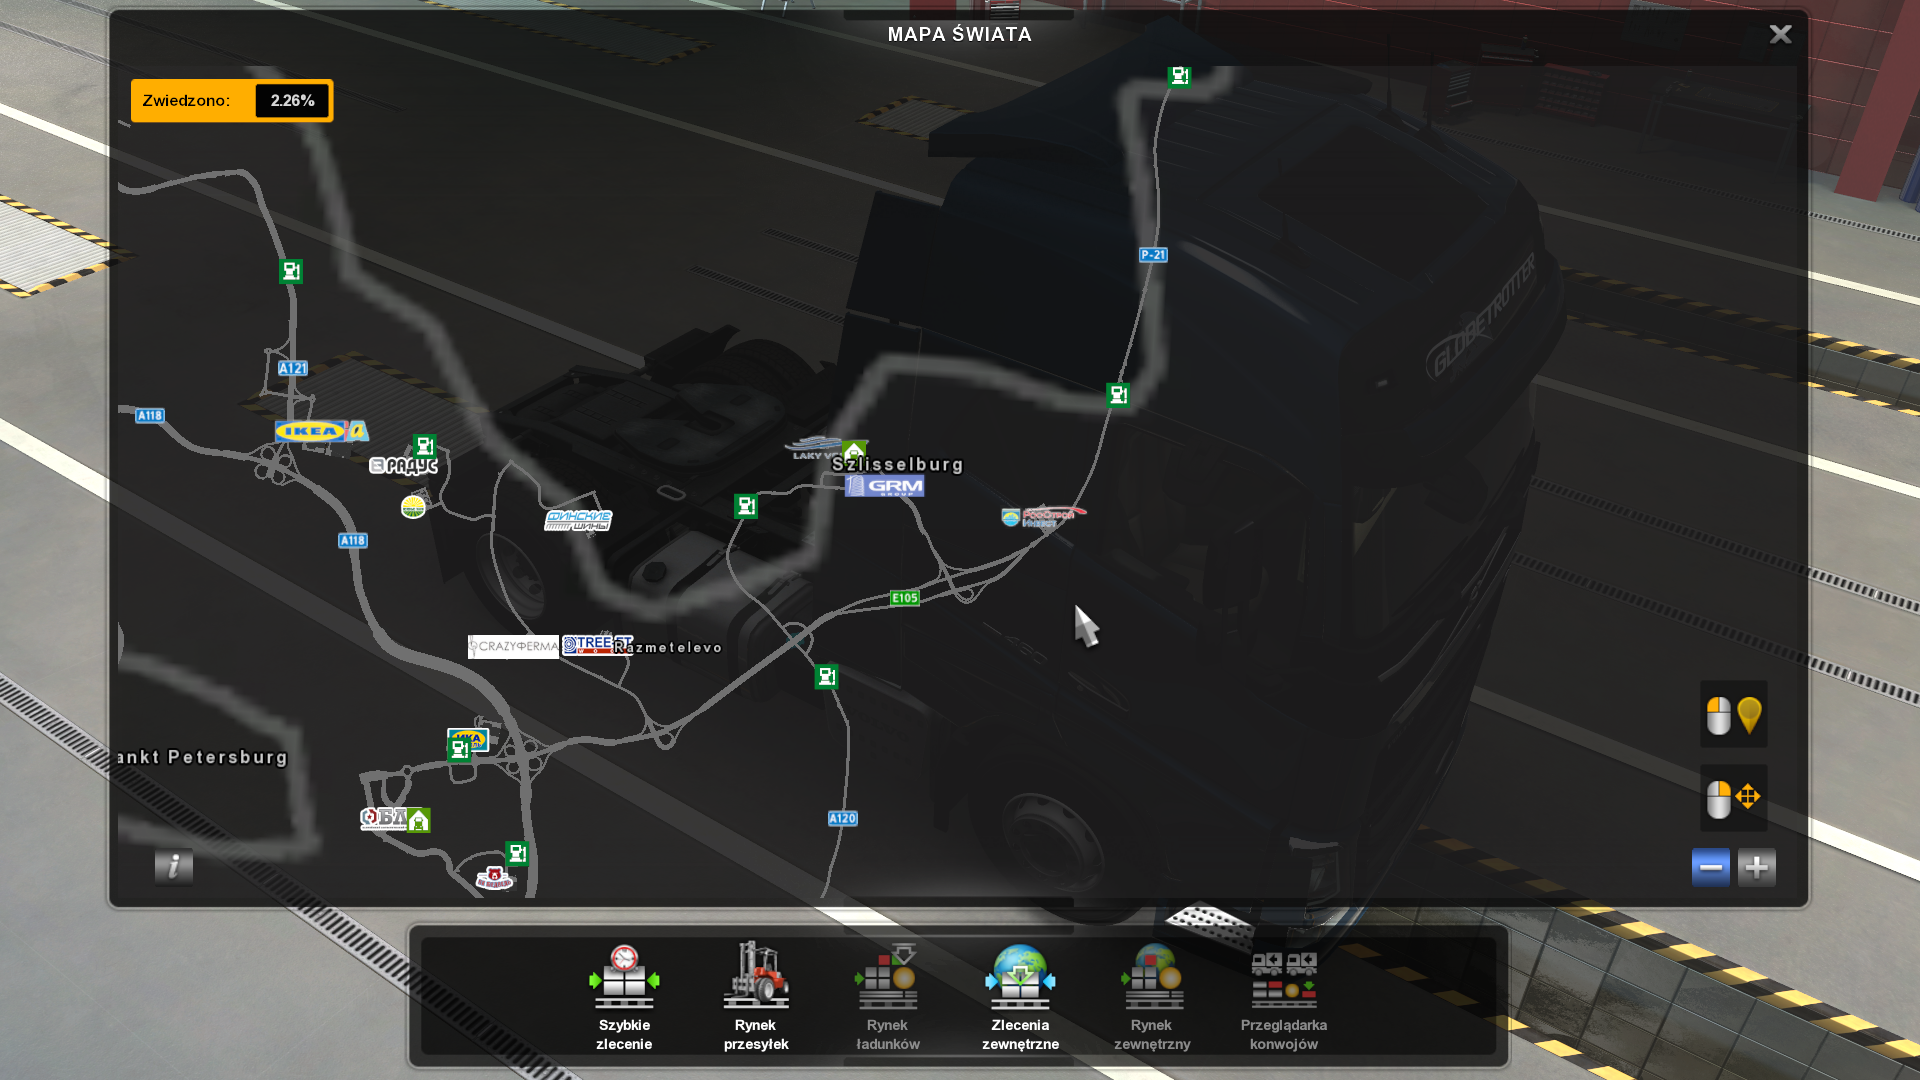 ets2_20210815_222608_00.png